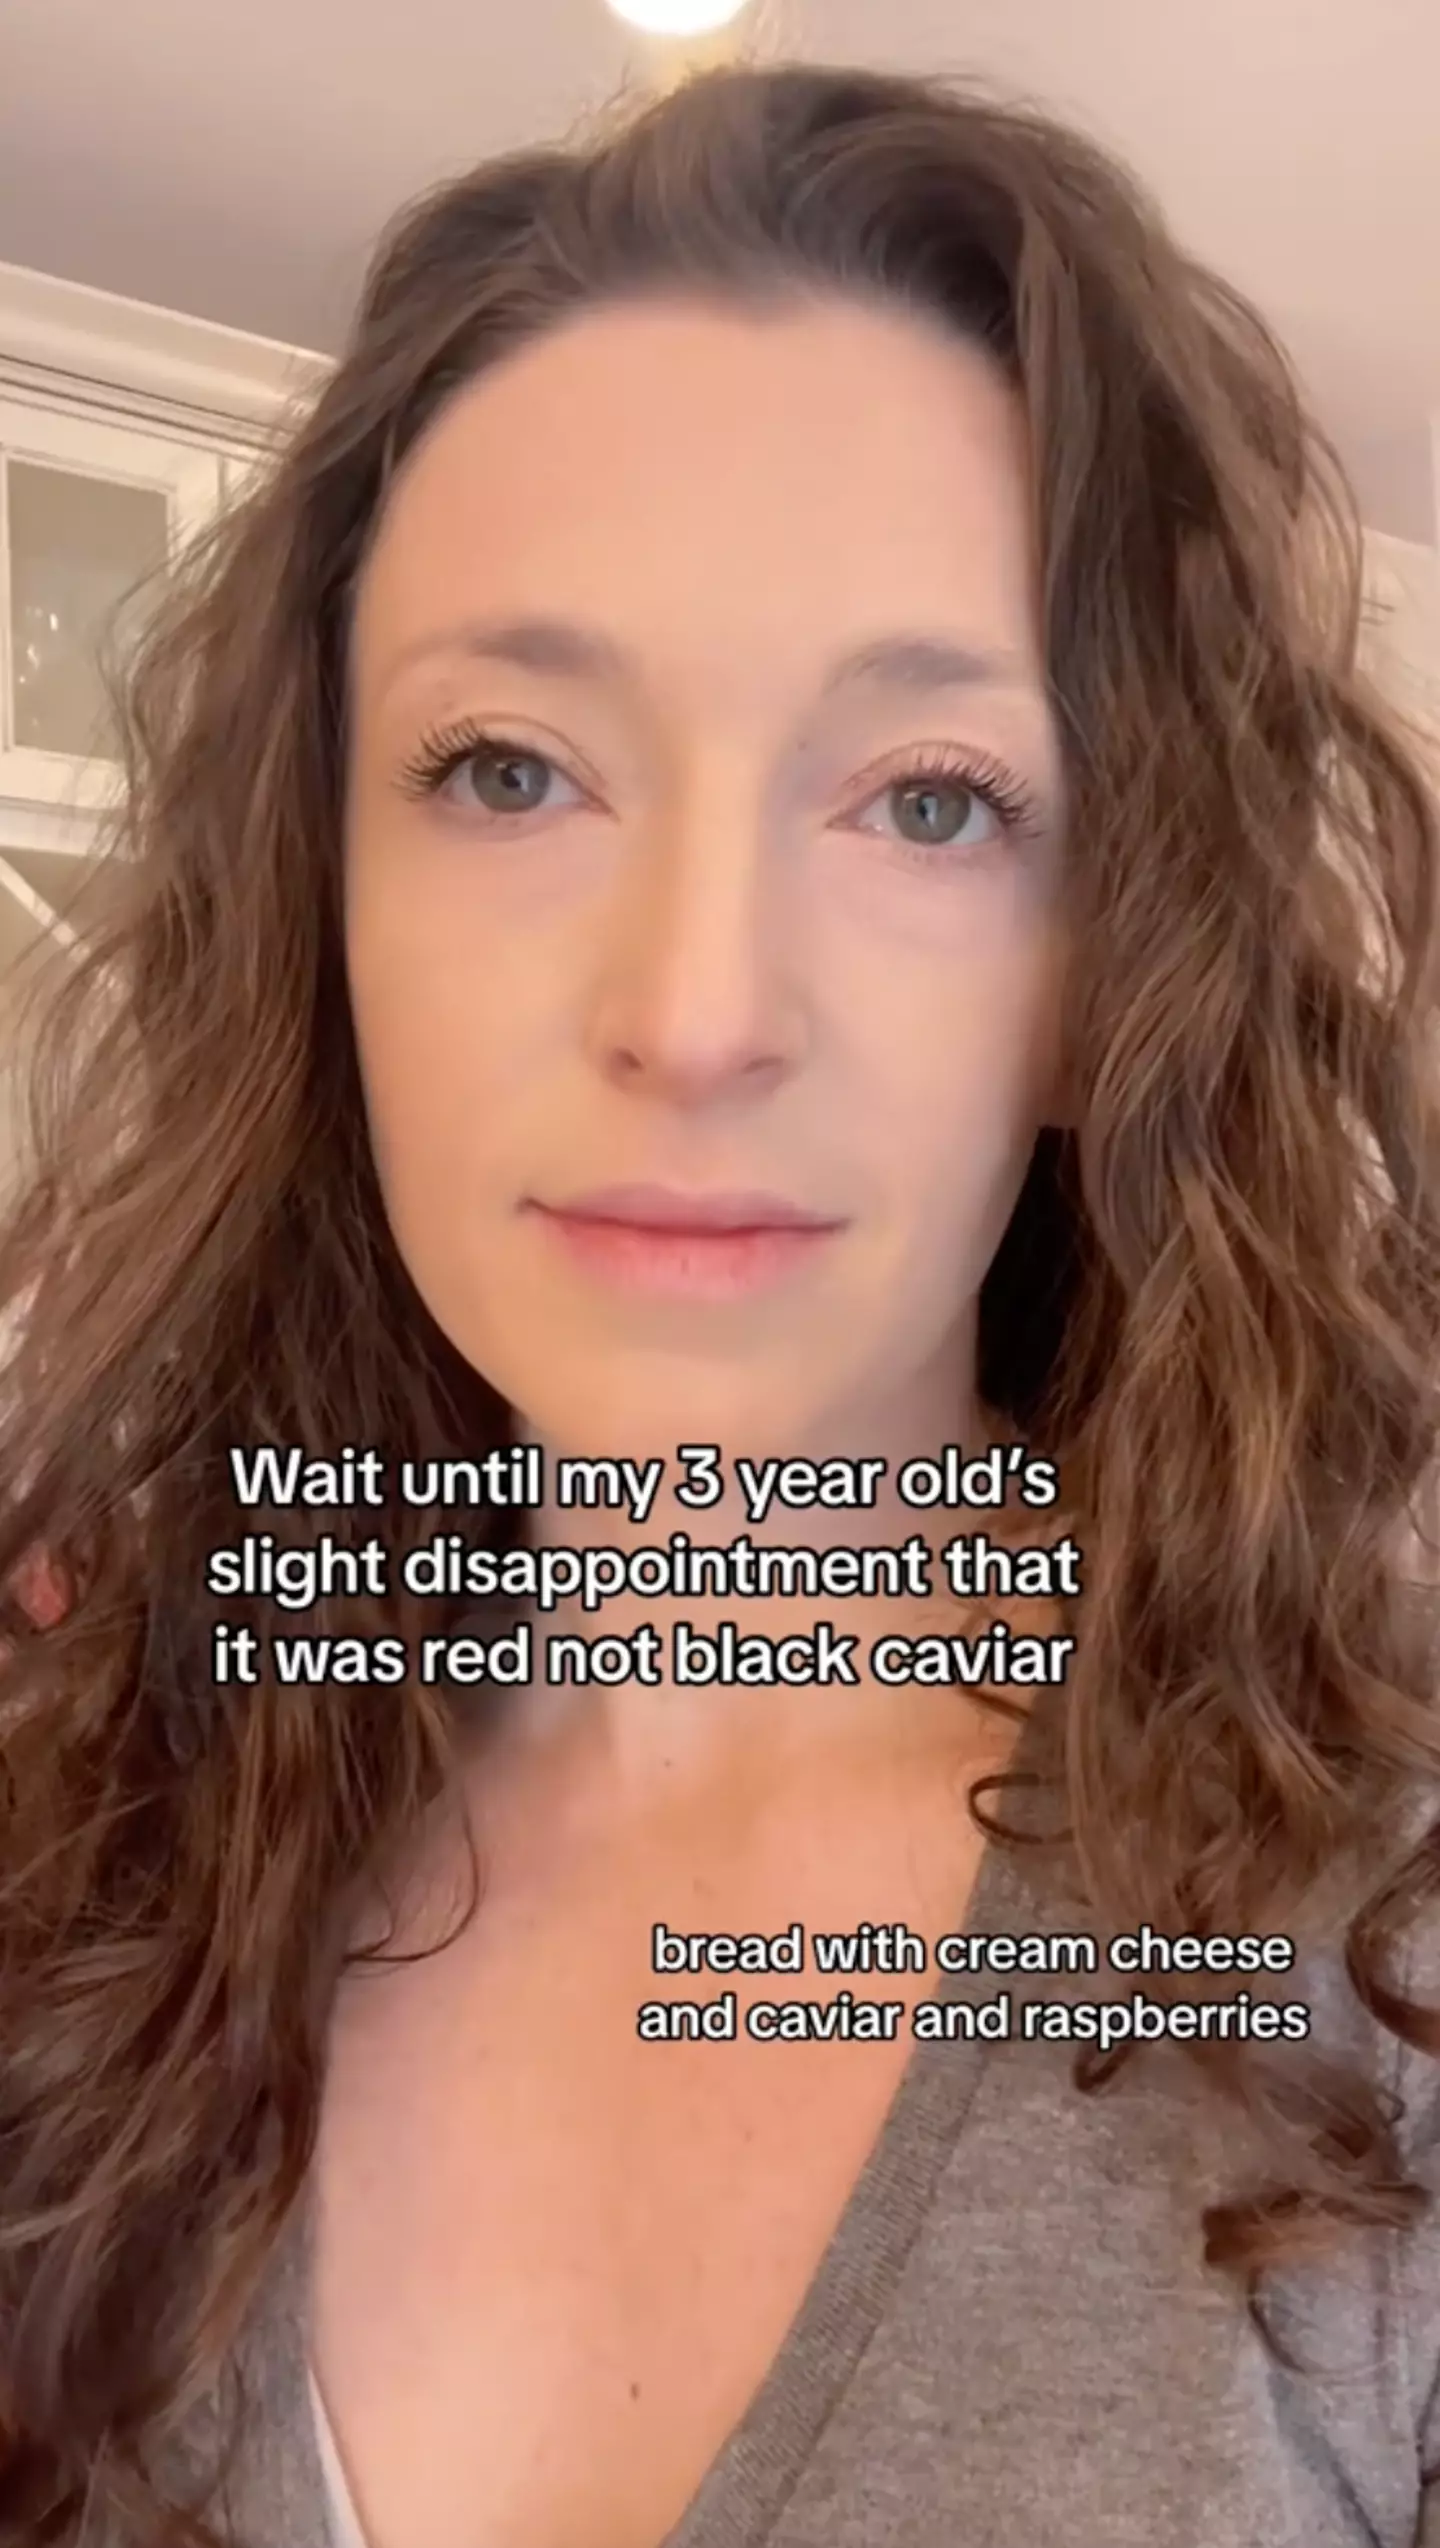 Niky took to TikTok to open up about her kids' 'caviar addiction'.